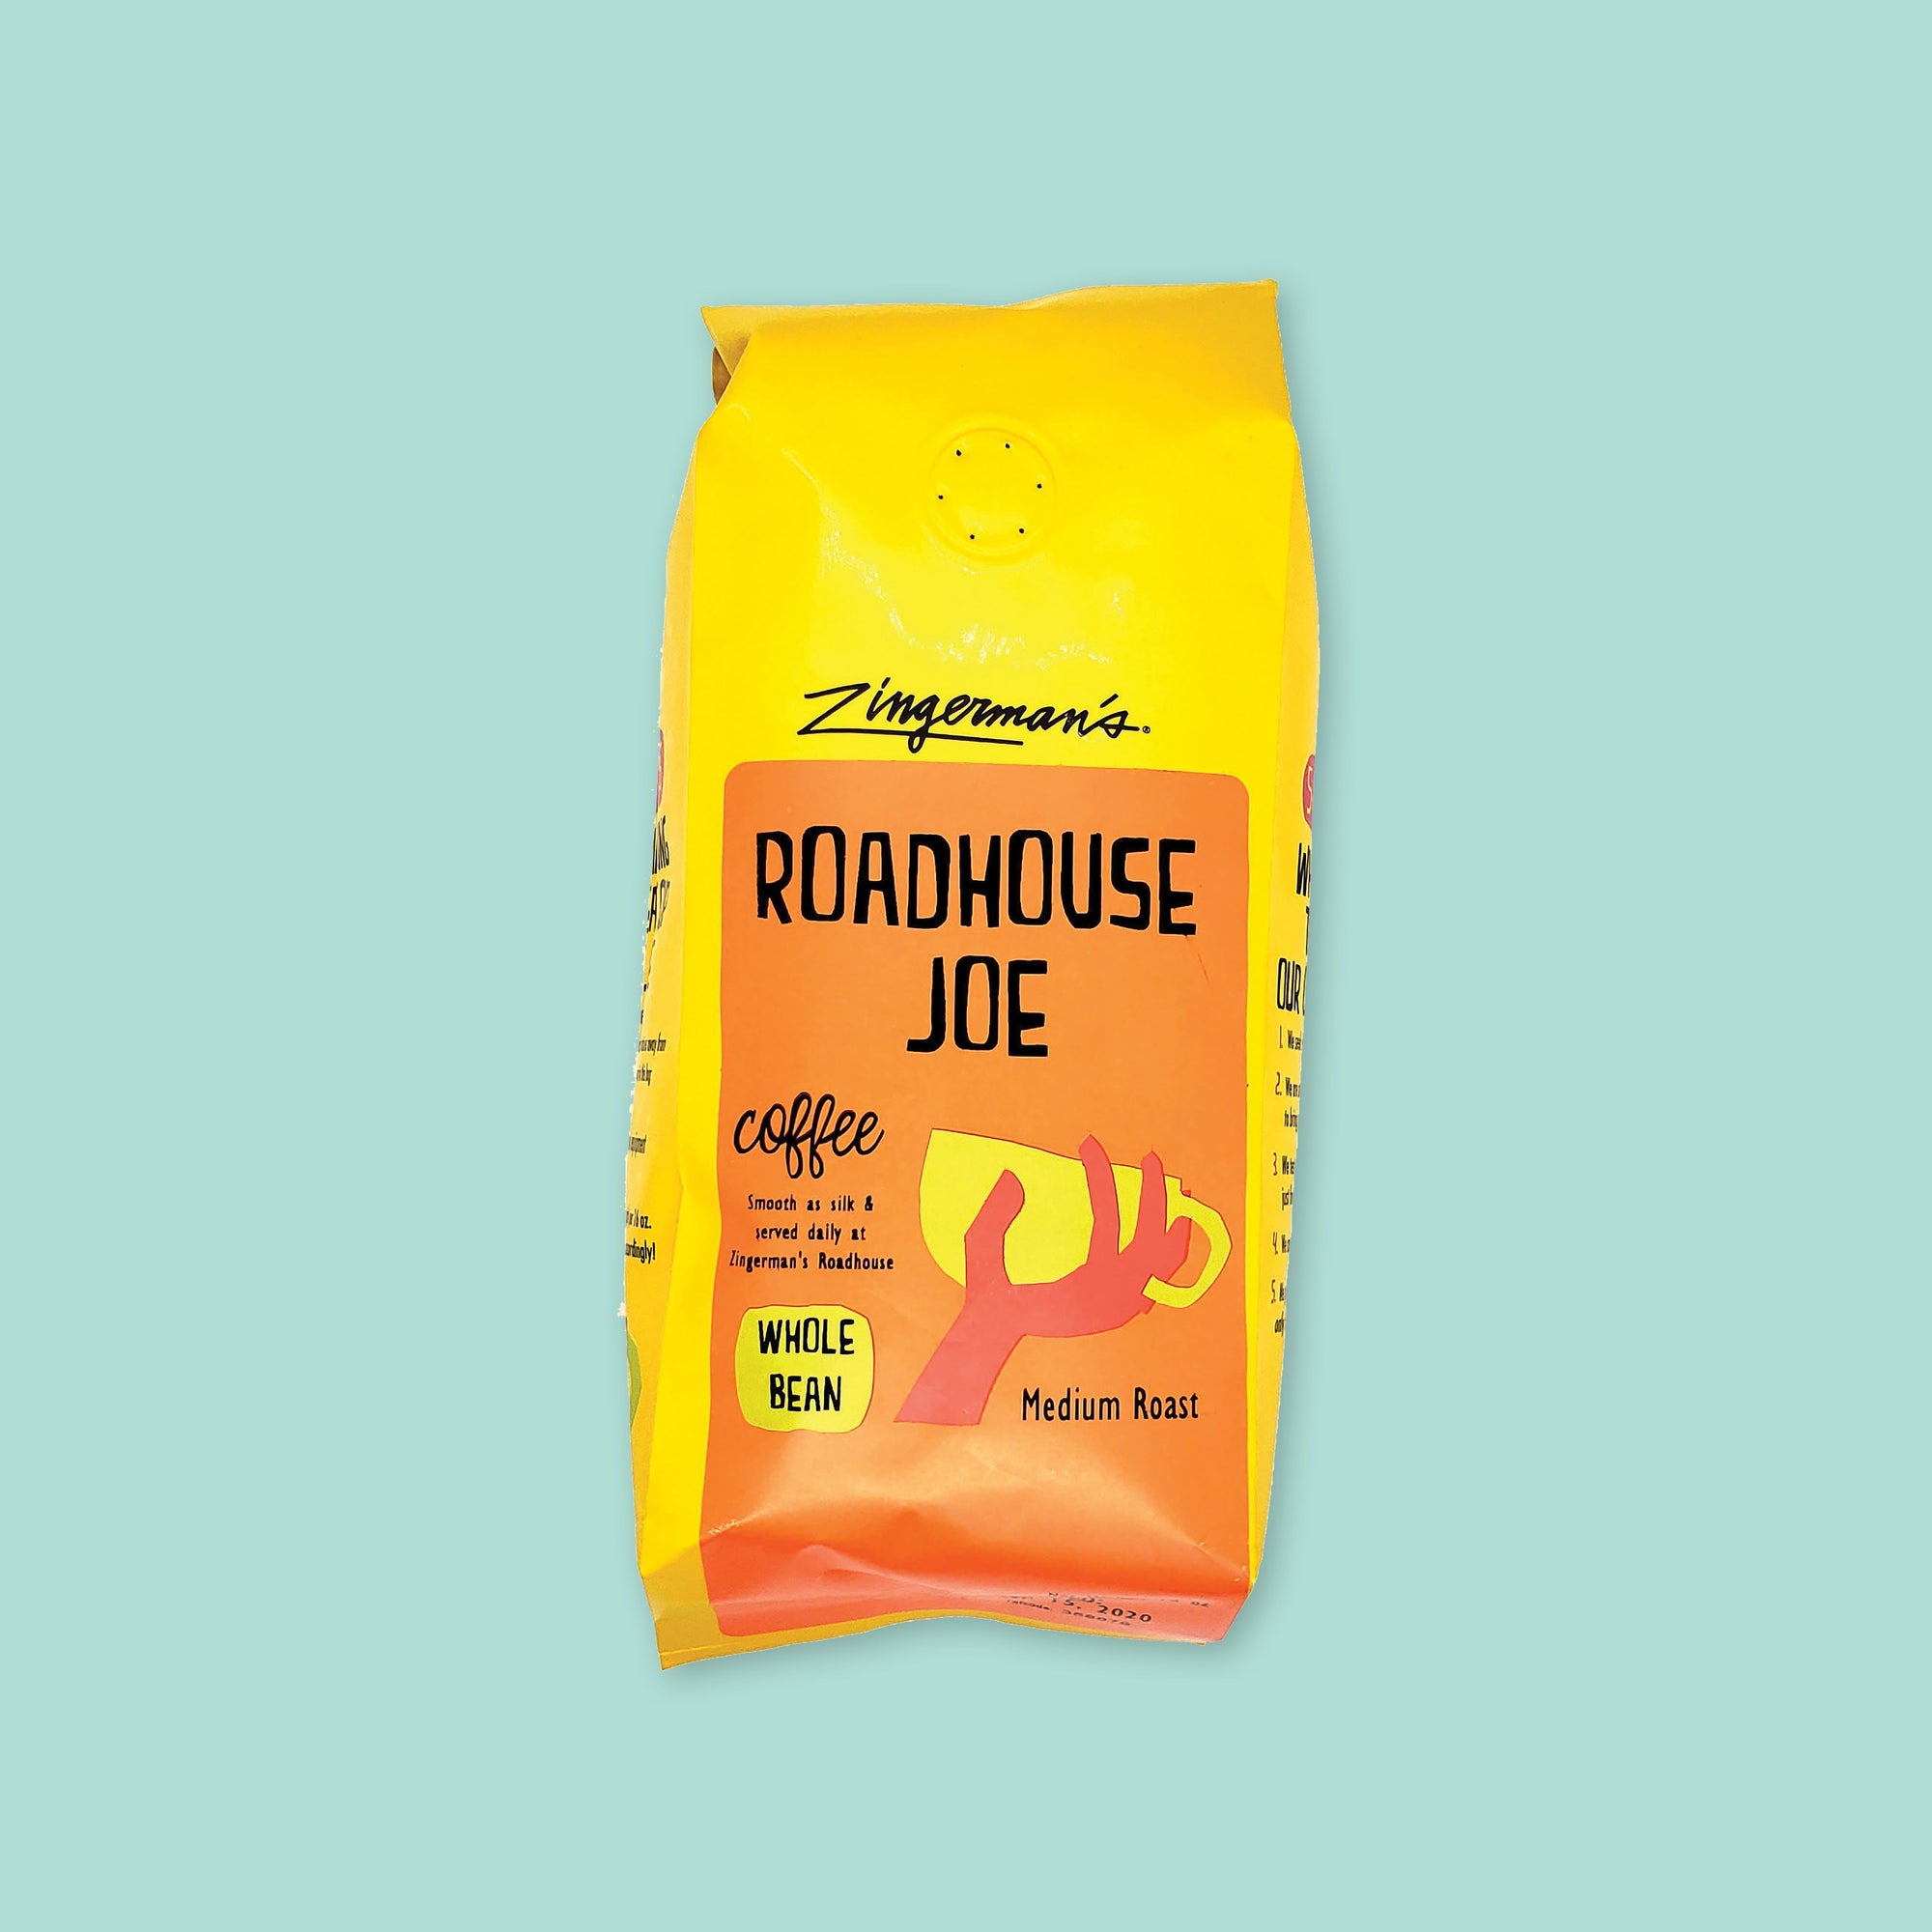 On a cool aqua background is a yellow bag of coffee. The coffee is Zingerman's brand Roadhouse Joe Blend. 'Smooth as silk and served daily at Zingerman's Roadhouse' Ground coffee. 12 oz (350 g)